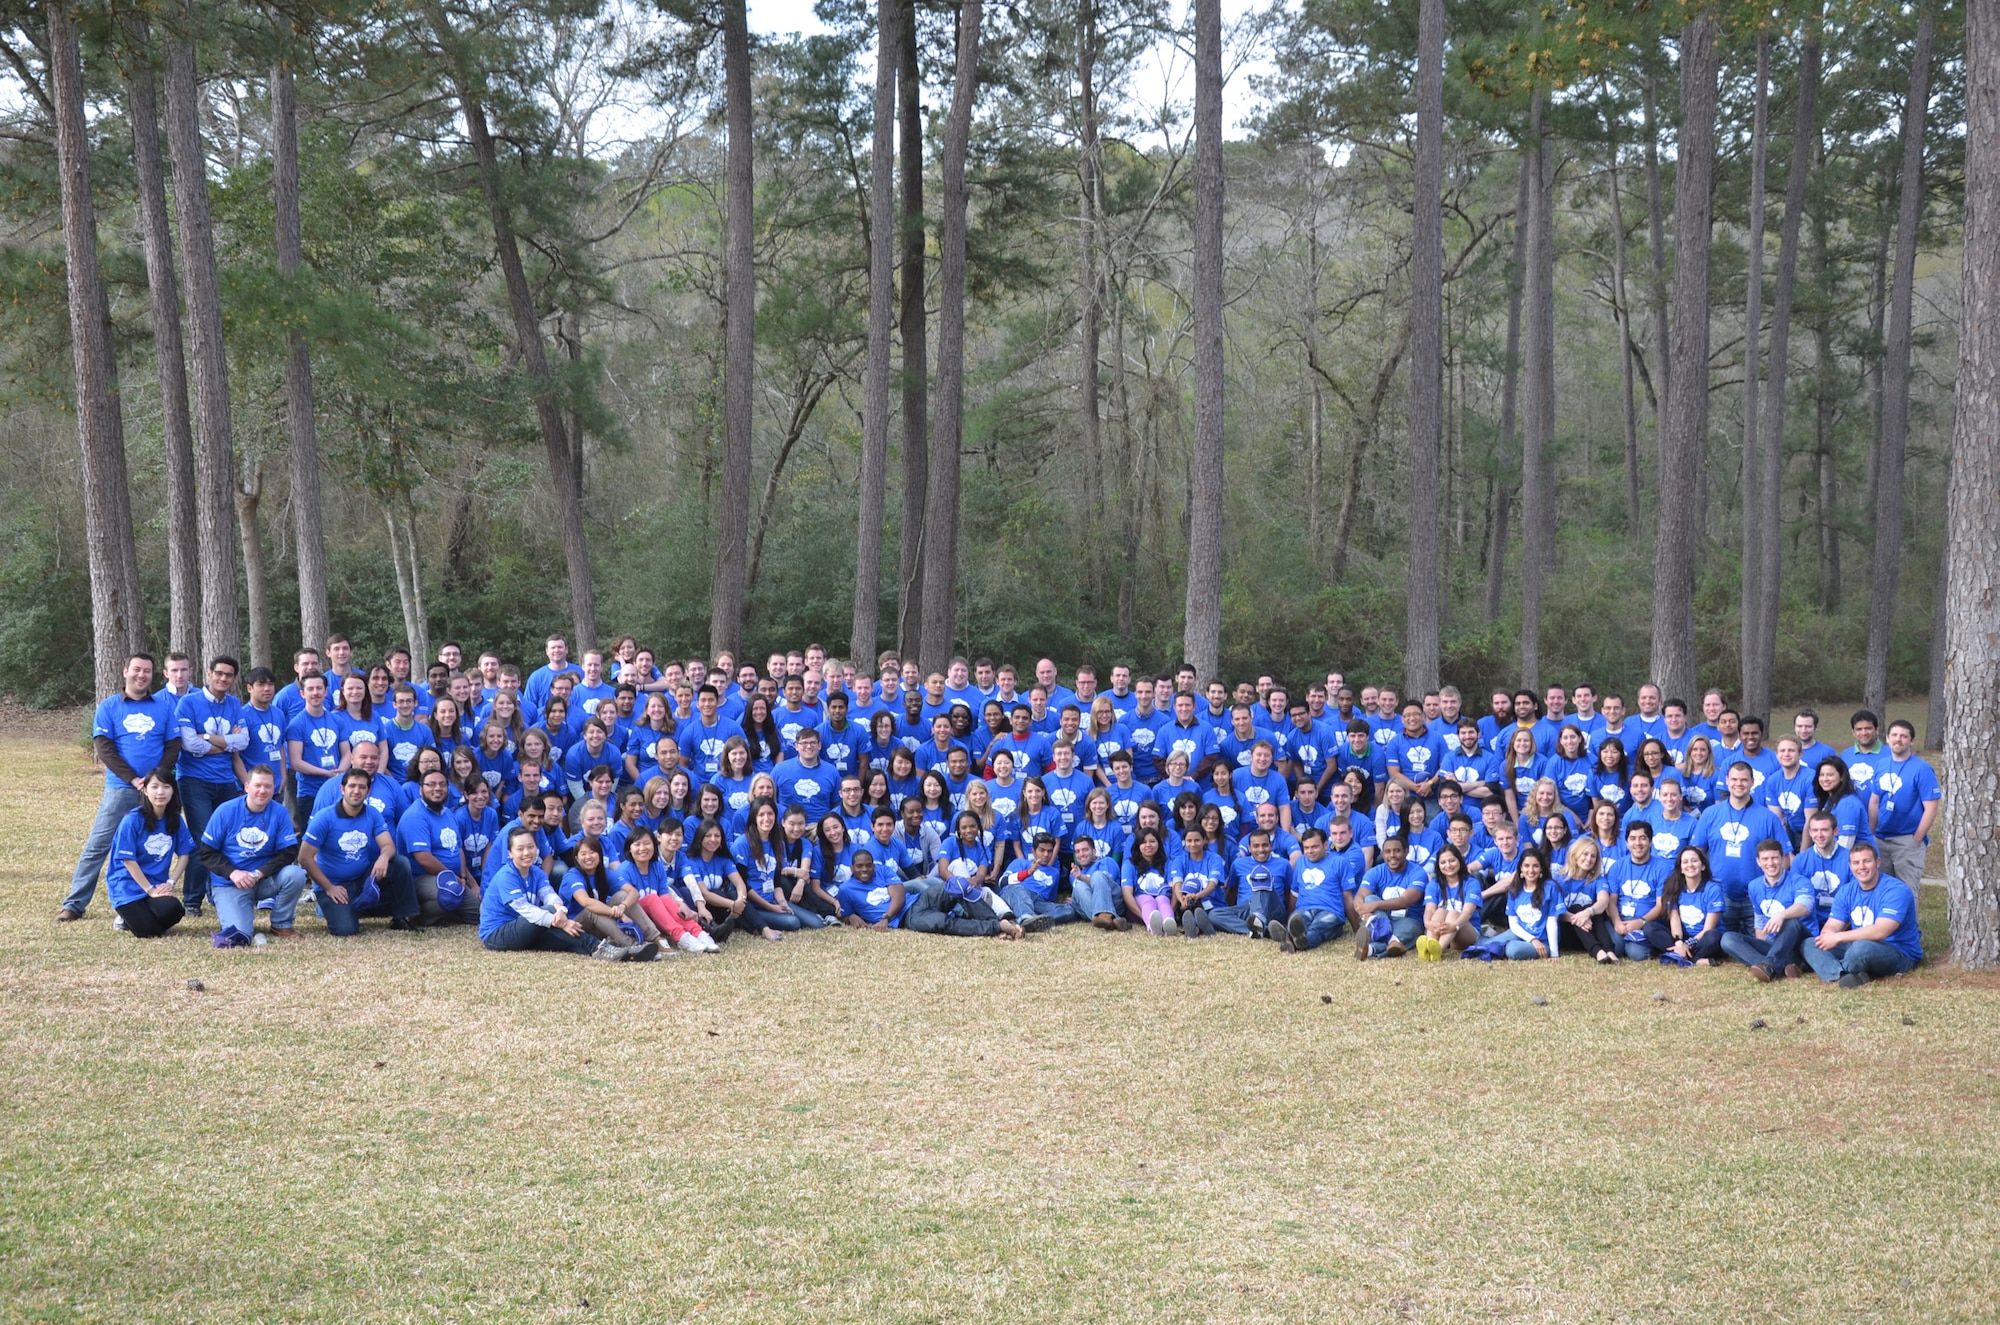 AEDC Engineers Nathan Sindorf and Billy Stack participated in a Jacobs Future Weekend with 191 other engineers, shown in this photo, from Jacobs organizations across the world. (Photo provided)